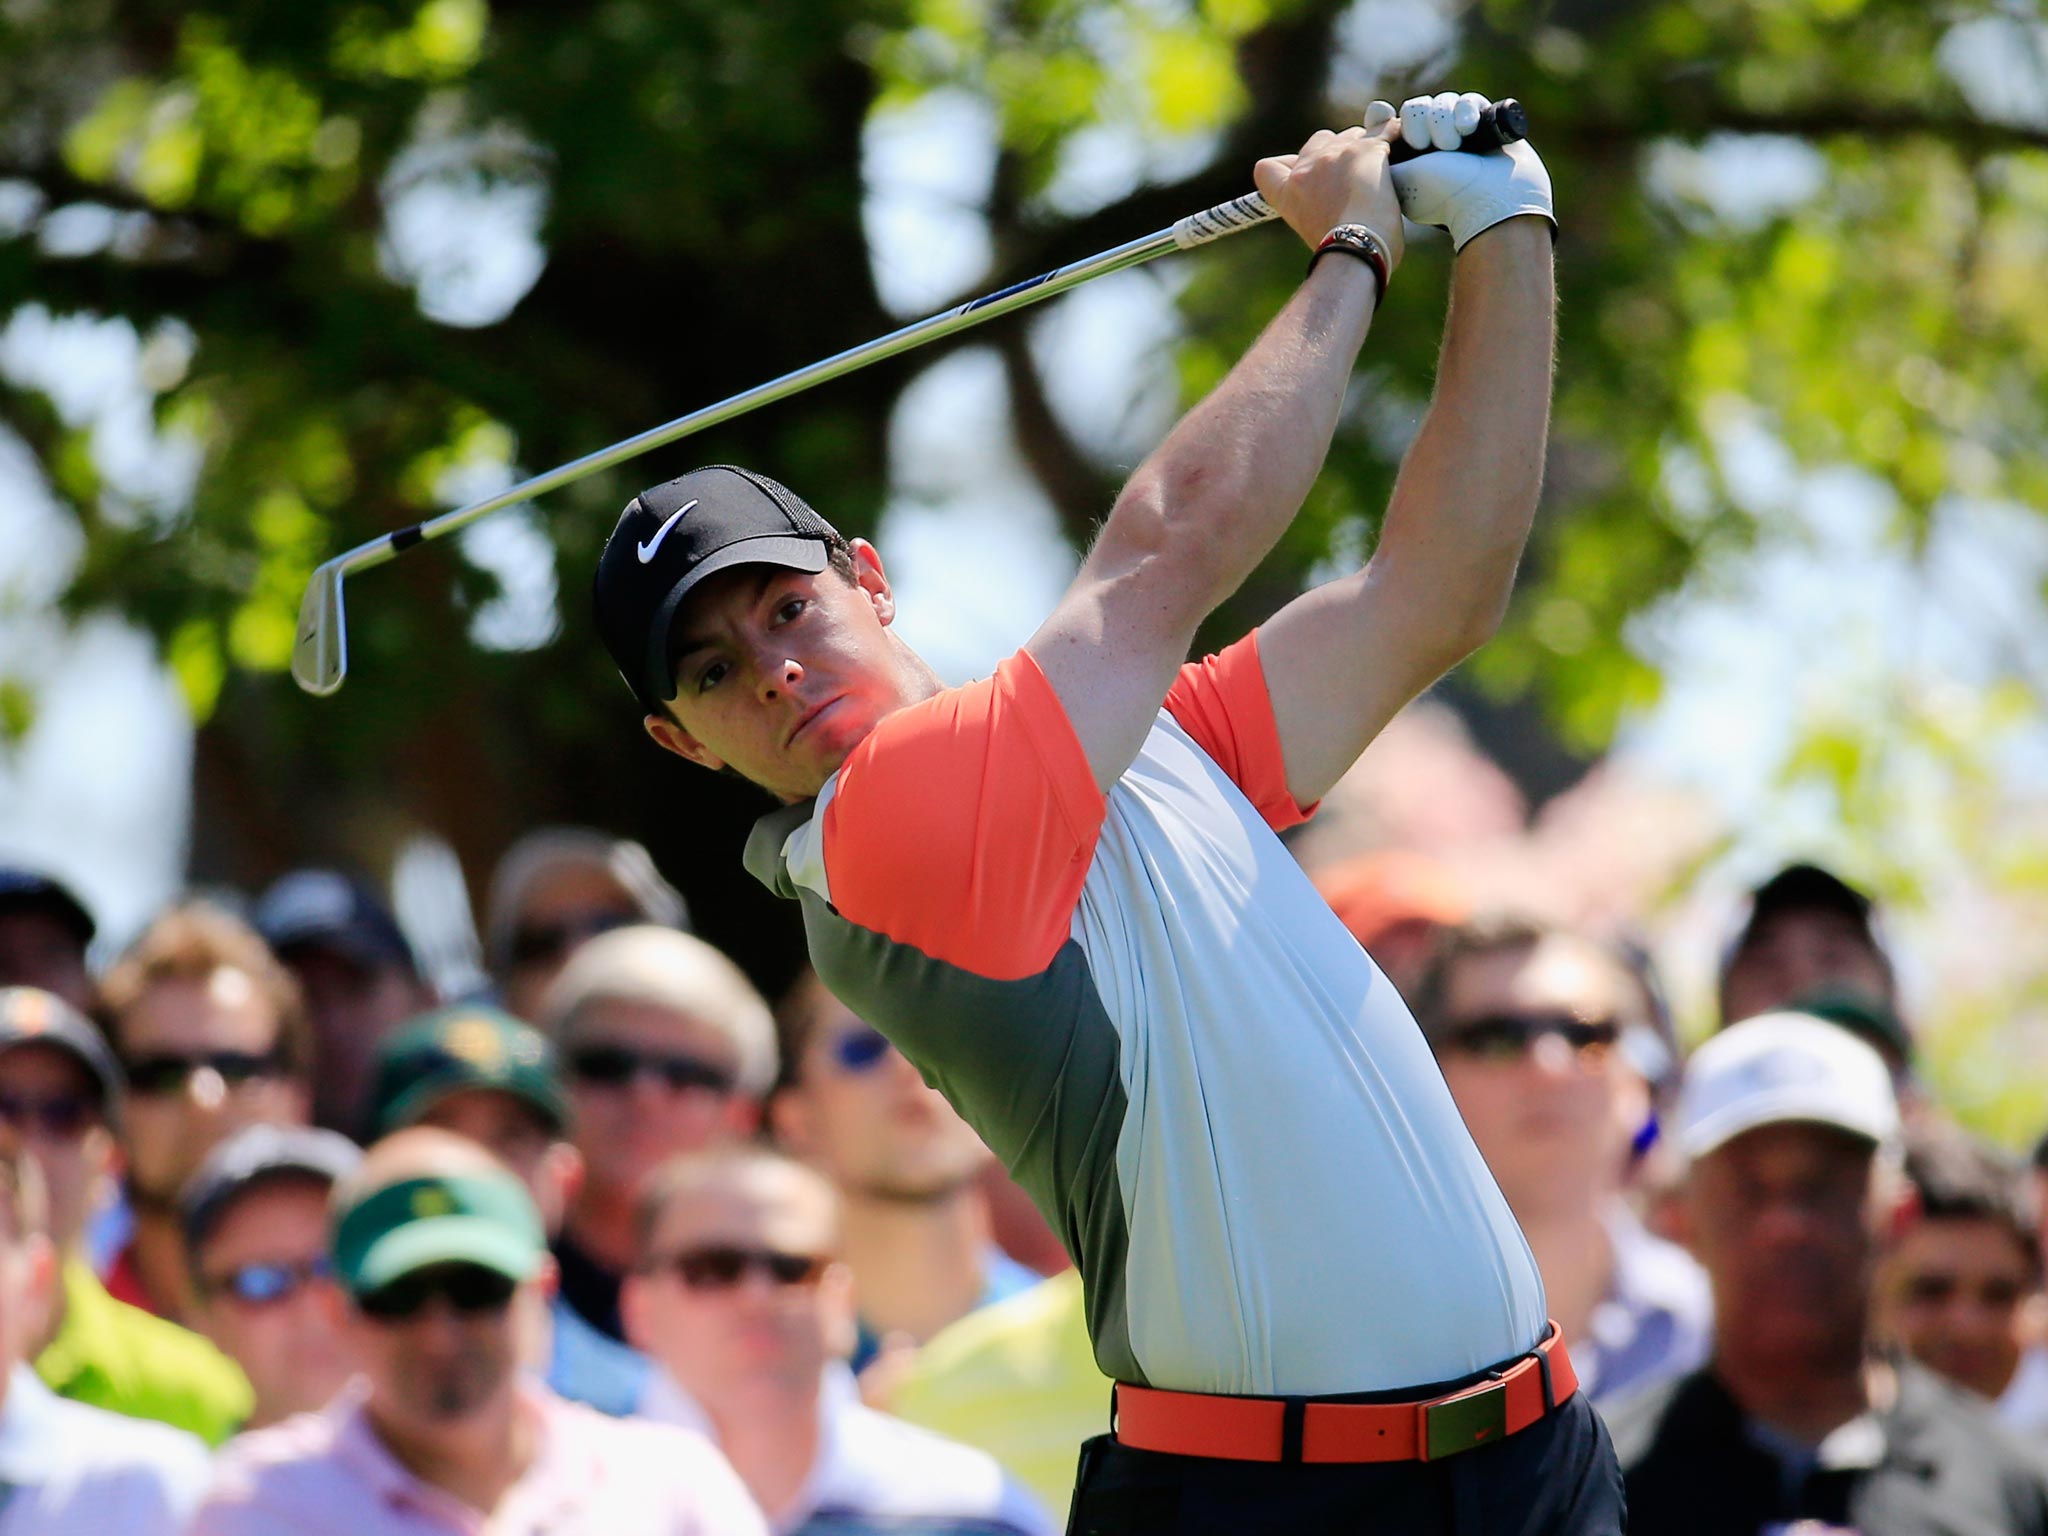 Rory McIlroy had three bogeys but did enough to show promise for
the weekend